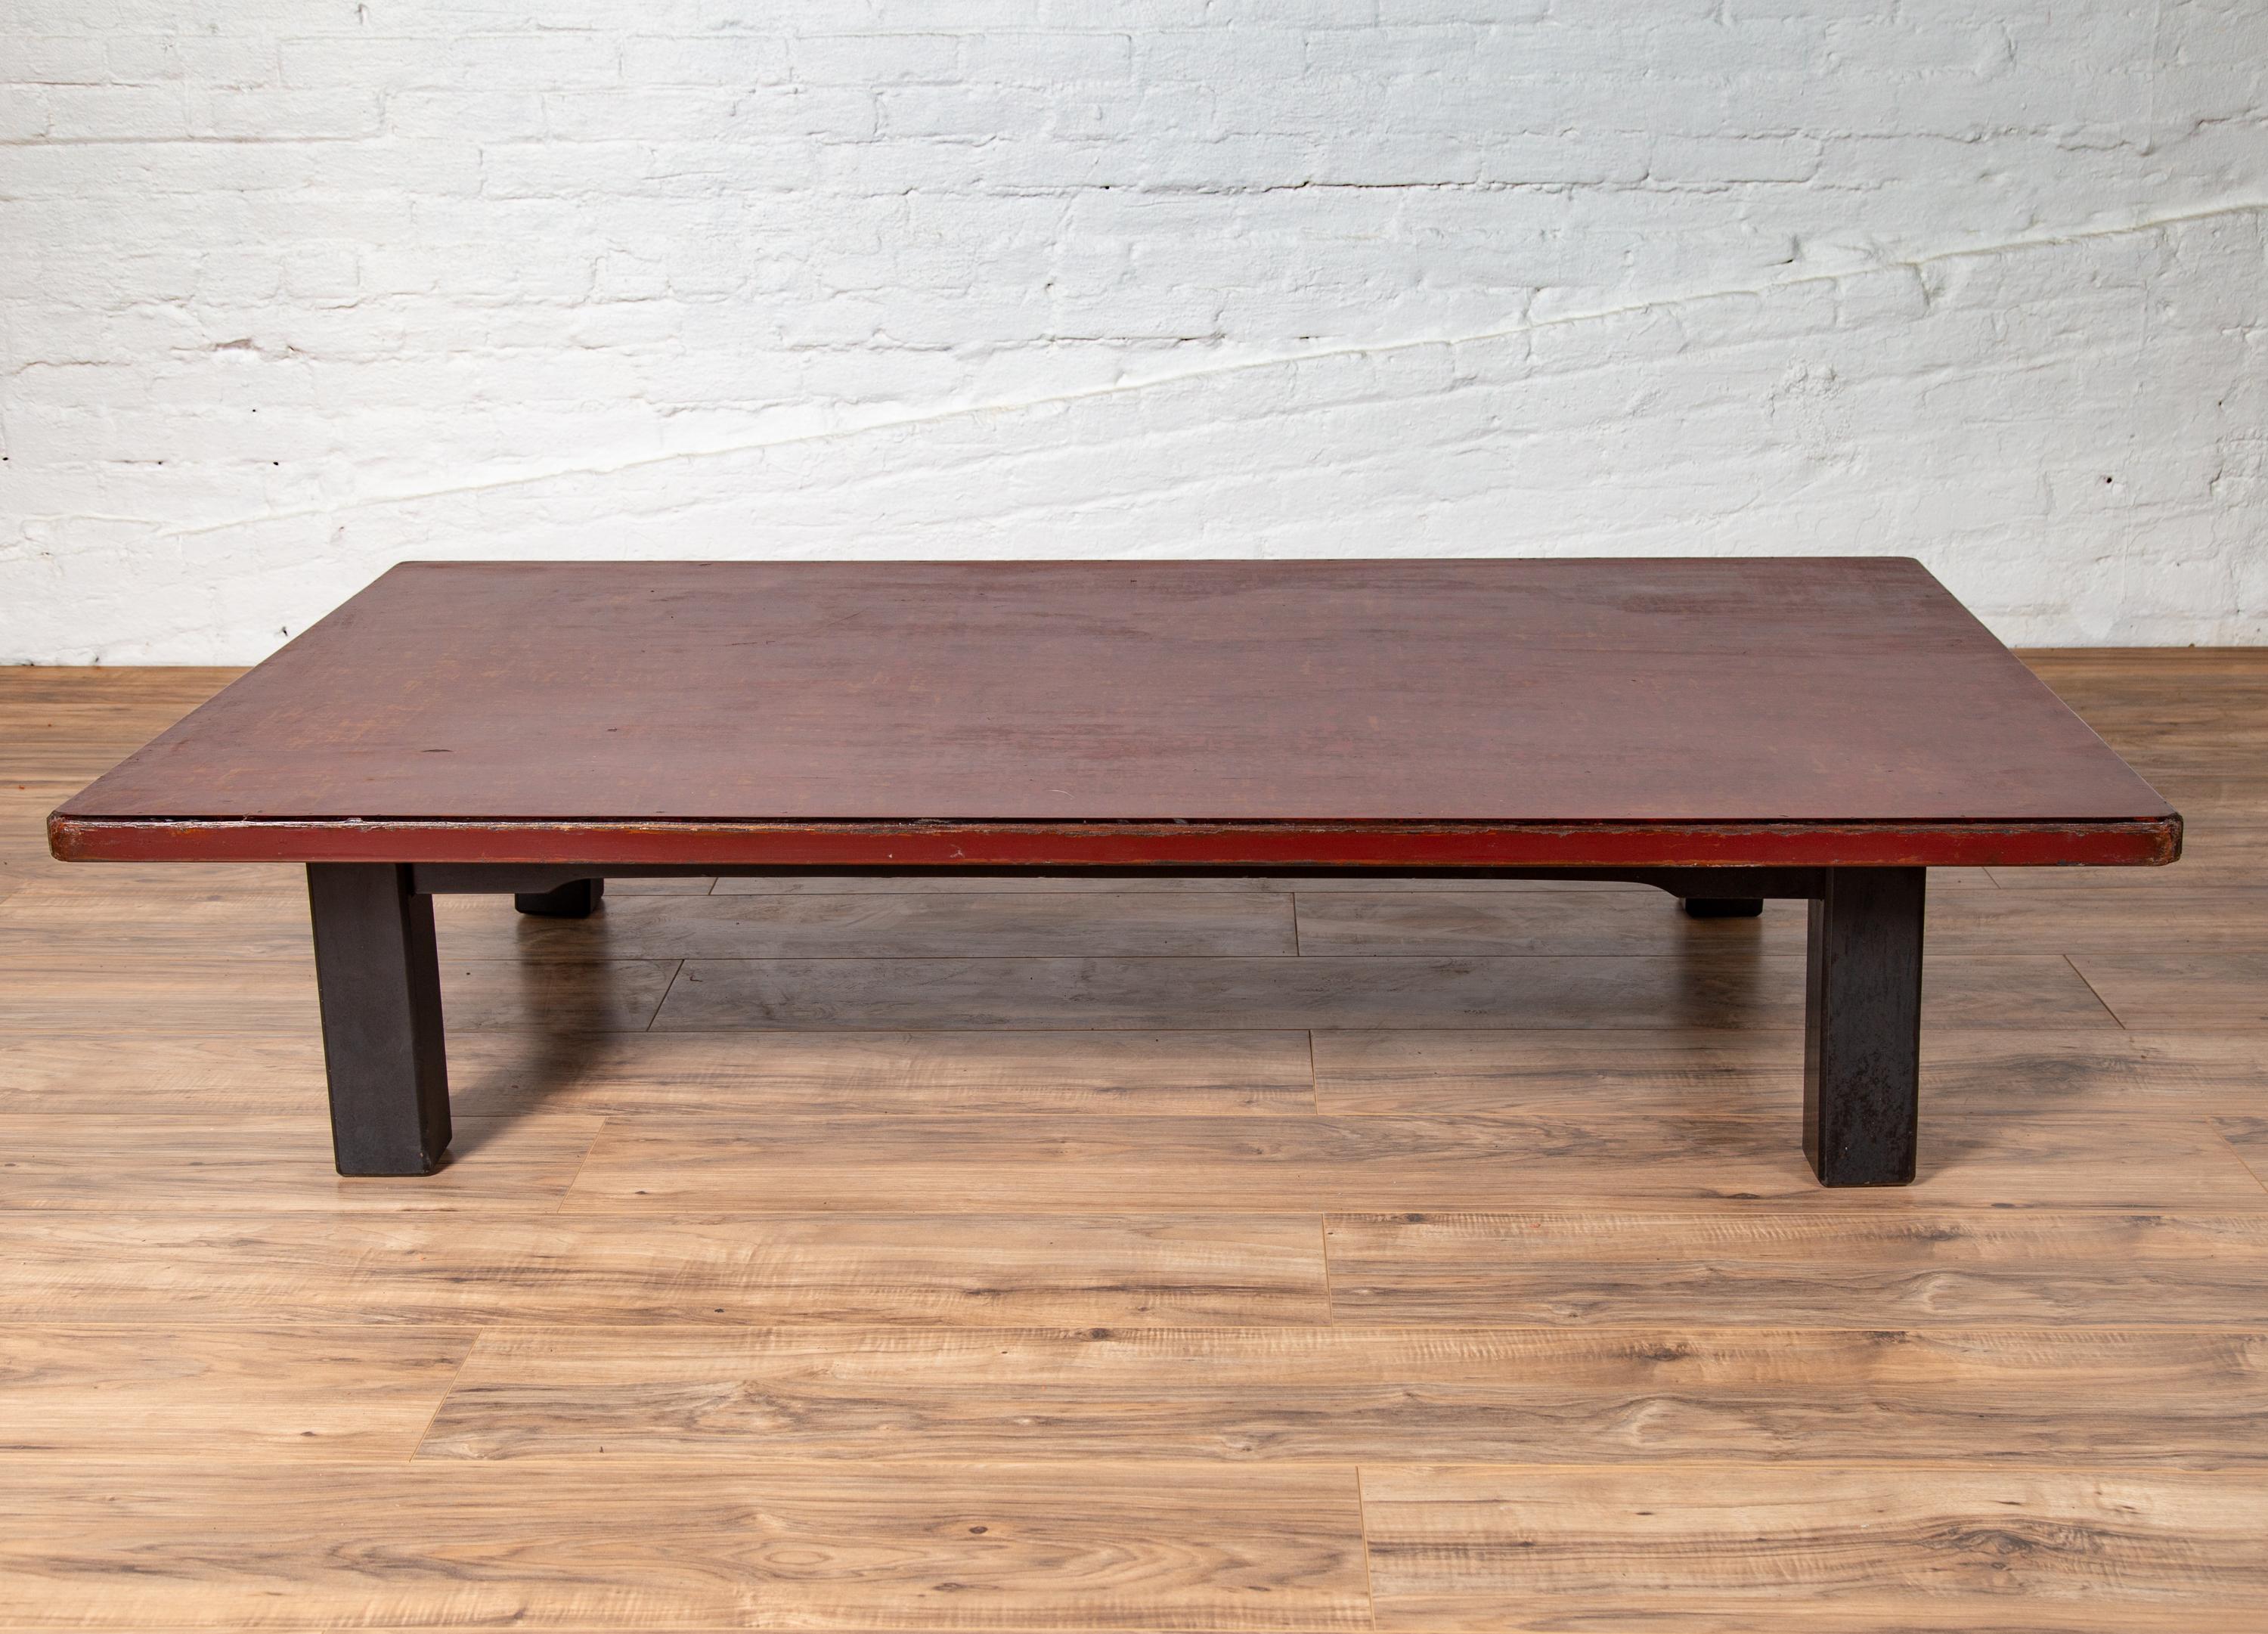 A Japanese Taisho period coffee table from the early 20th century, with Negora lacquer and black legs. Born in Japan during the first quarter of the 20th century, this charming coffee table was originally found in a coffee shop (you will indeed